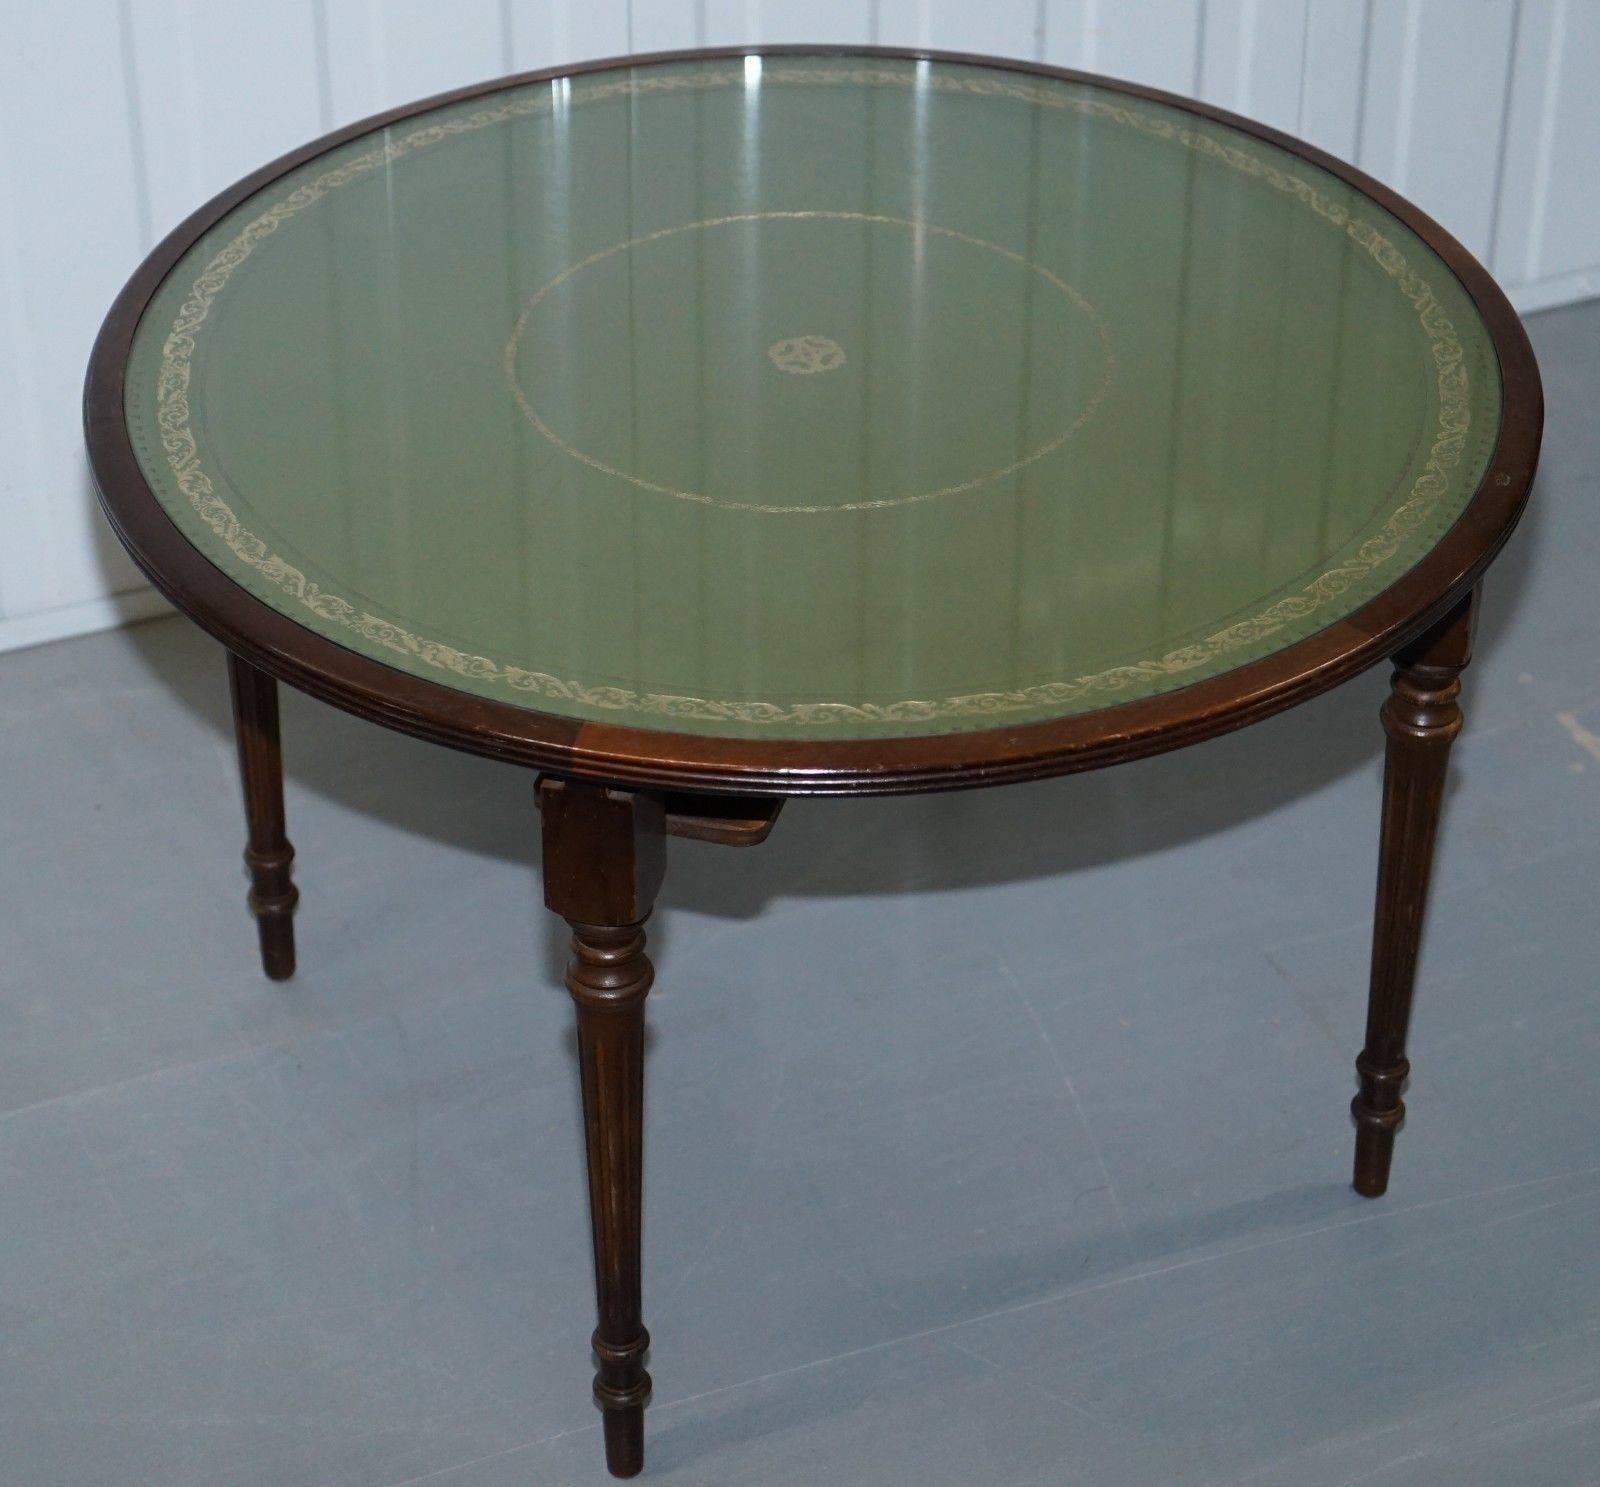 Lovely Regency Style Drum Coffee Table with Nested Tables under Green Leather 6